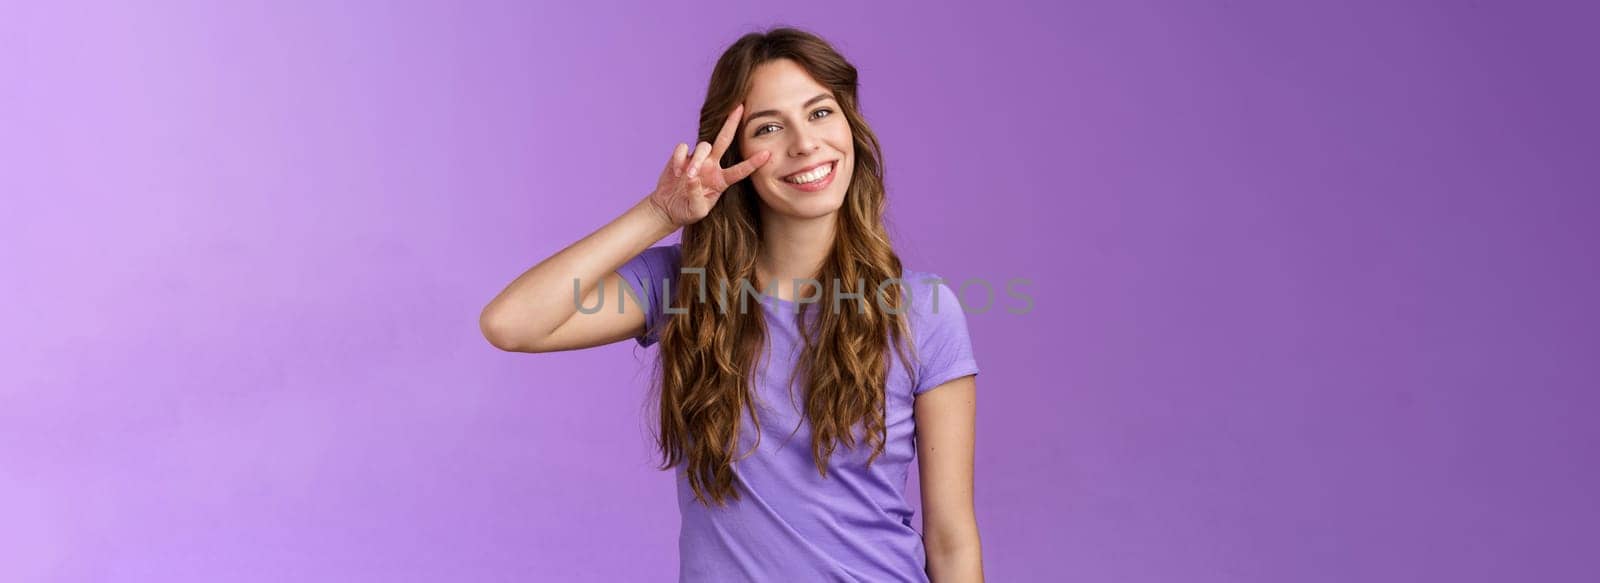 Tender friendly outgoing attractive female tilt head lovely cute gaze show peace victory sign express positivity love cherish friendship stand purple background upbeat relaxed casual pose. Lifestyle.